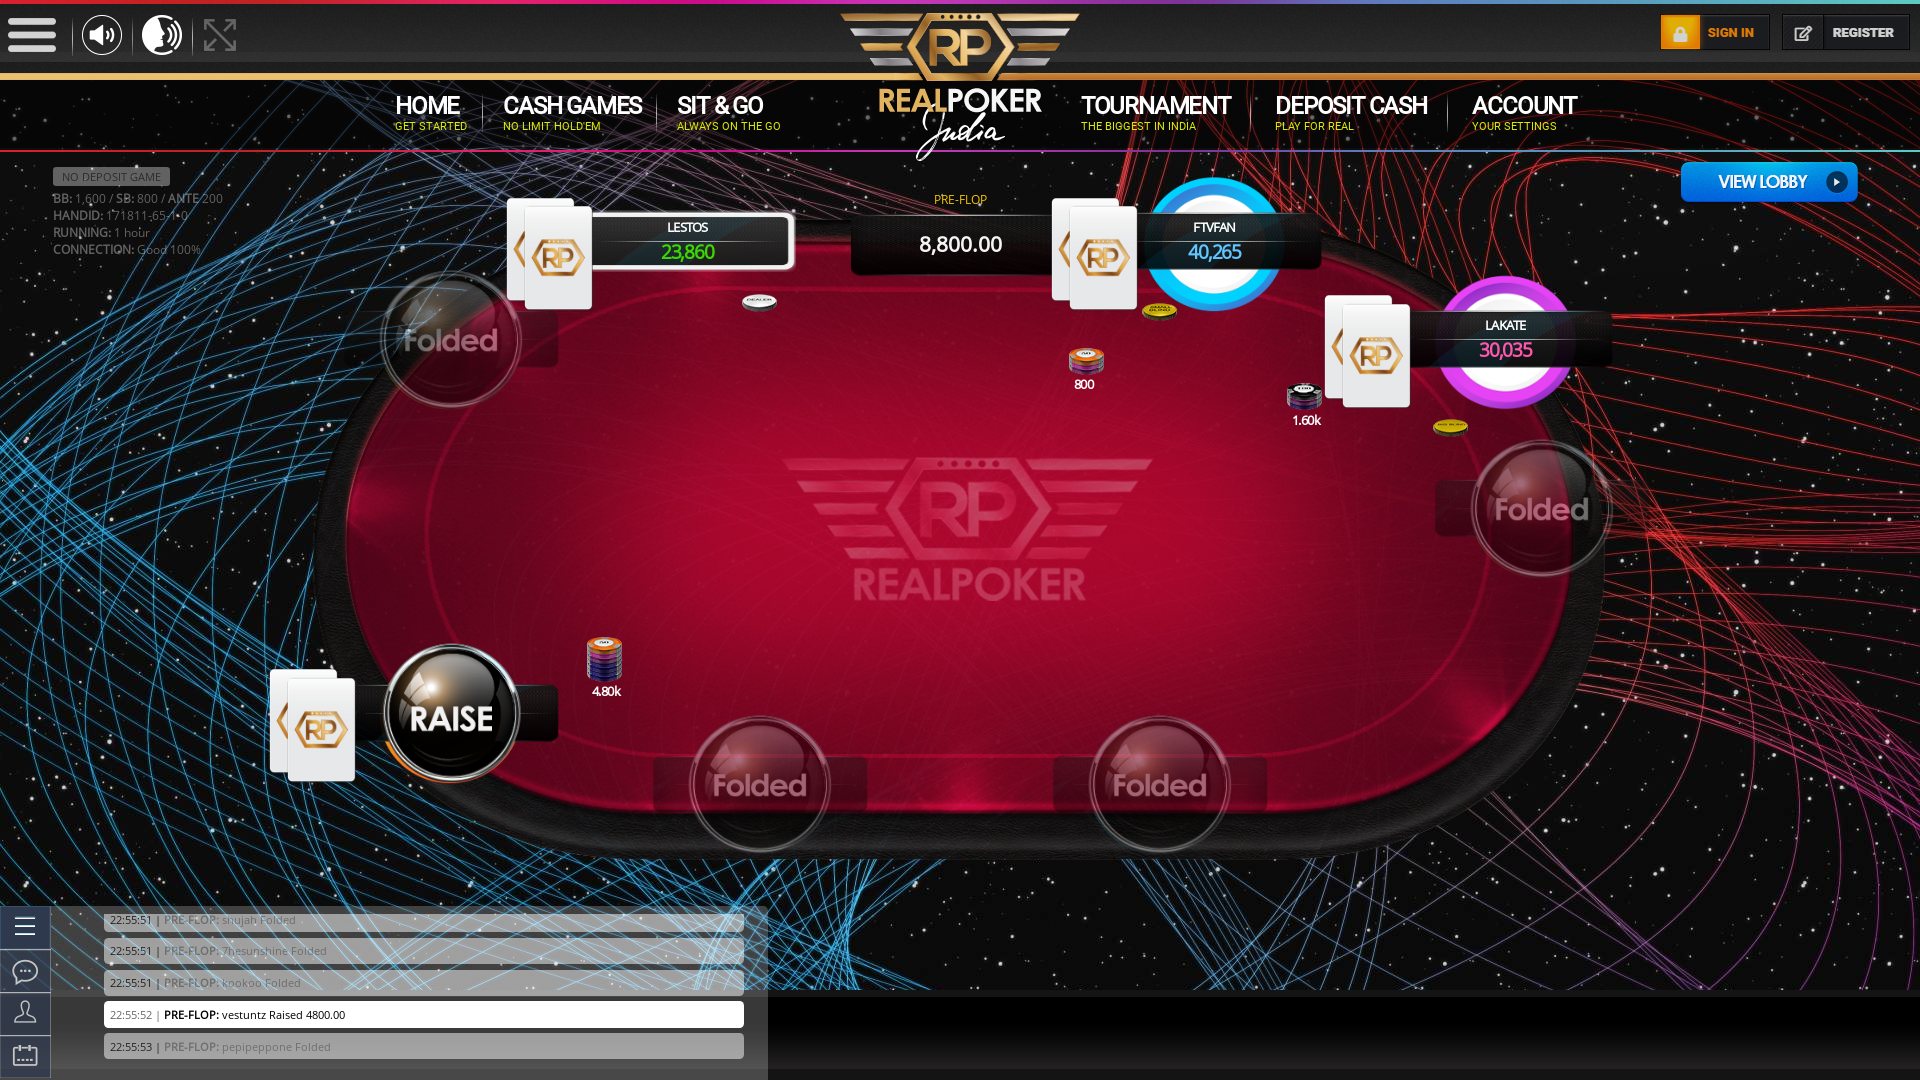 Ponda Goa real poker on a 10 player table in the 62nd minute of the meeting